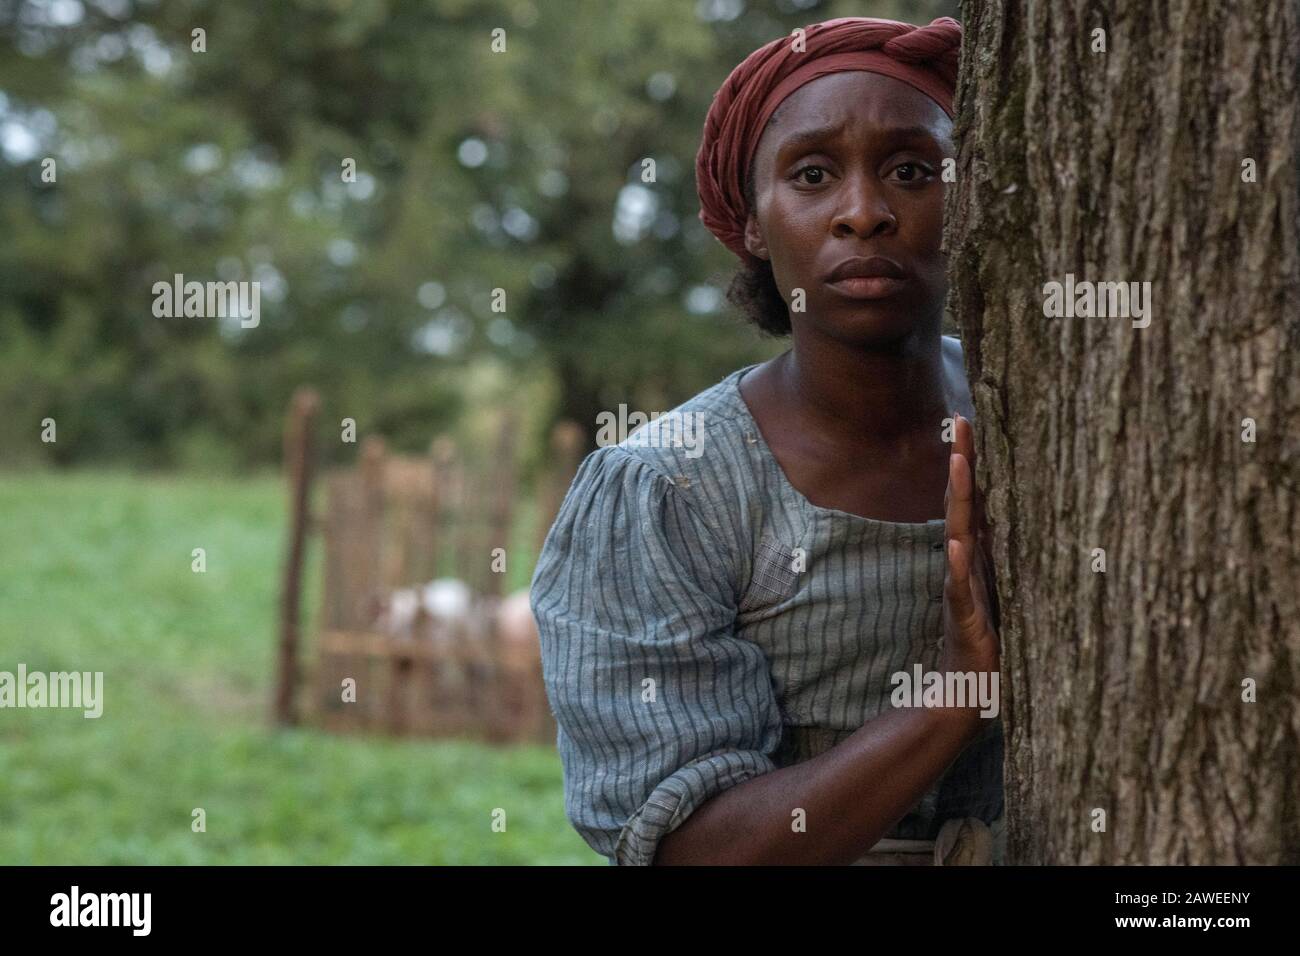 RELEASE DATE: 2019 TITLE: Harriet STUDIO: Focus Features DIRECTOR: Kasi Lemmons PLOT: Based on the story of iconic freedom fighter Harriet Tubman, her escape from slavery and subsequent missions to free dozens of slaves through the Underground Railroad in the face of growing pre-Civil War adversity. STARRING: CYNTHIA ERIVO as Harriet Tubman. (Credit Image: © Focus Features/Entertainment Pictures) Stock Photo